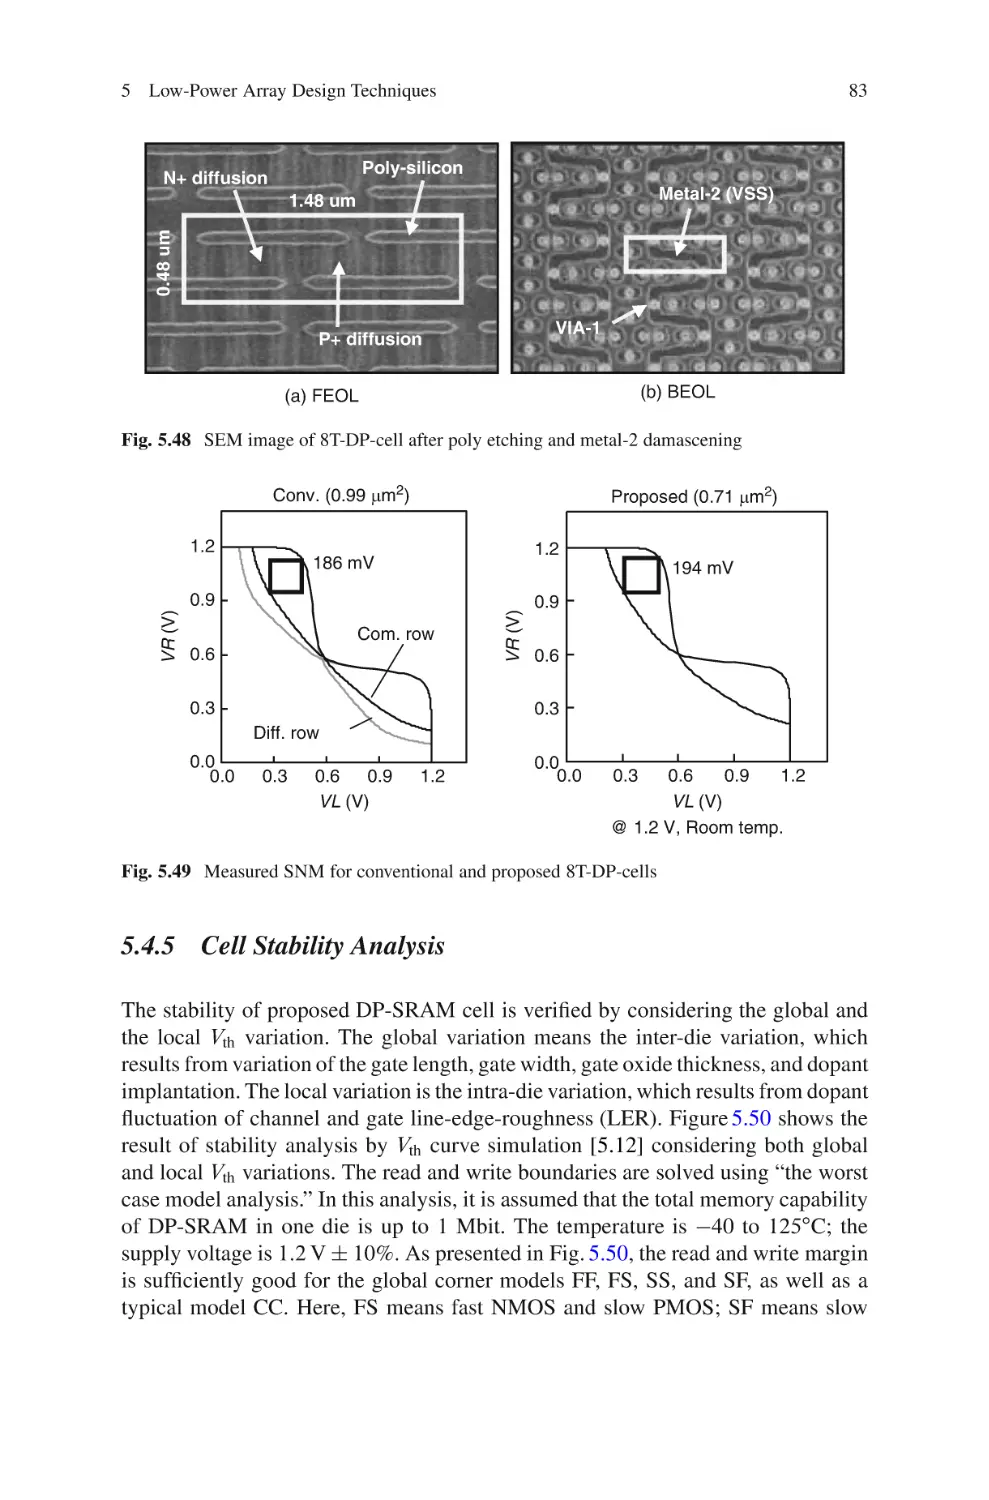 5.4.5 Cell Stability Analysis